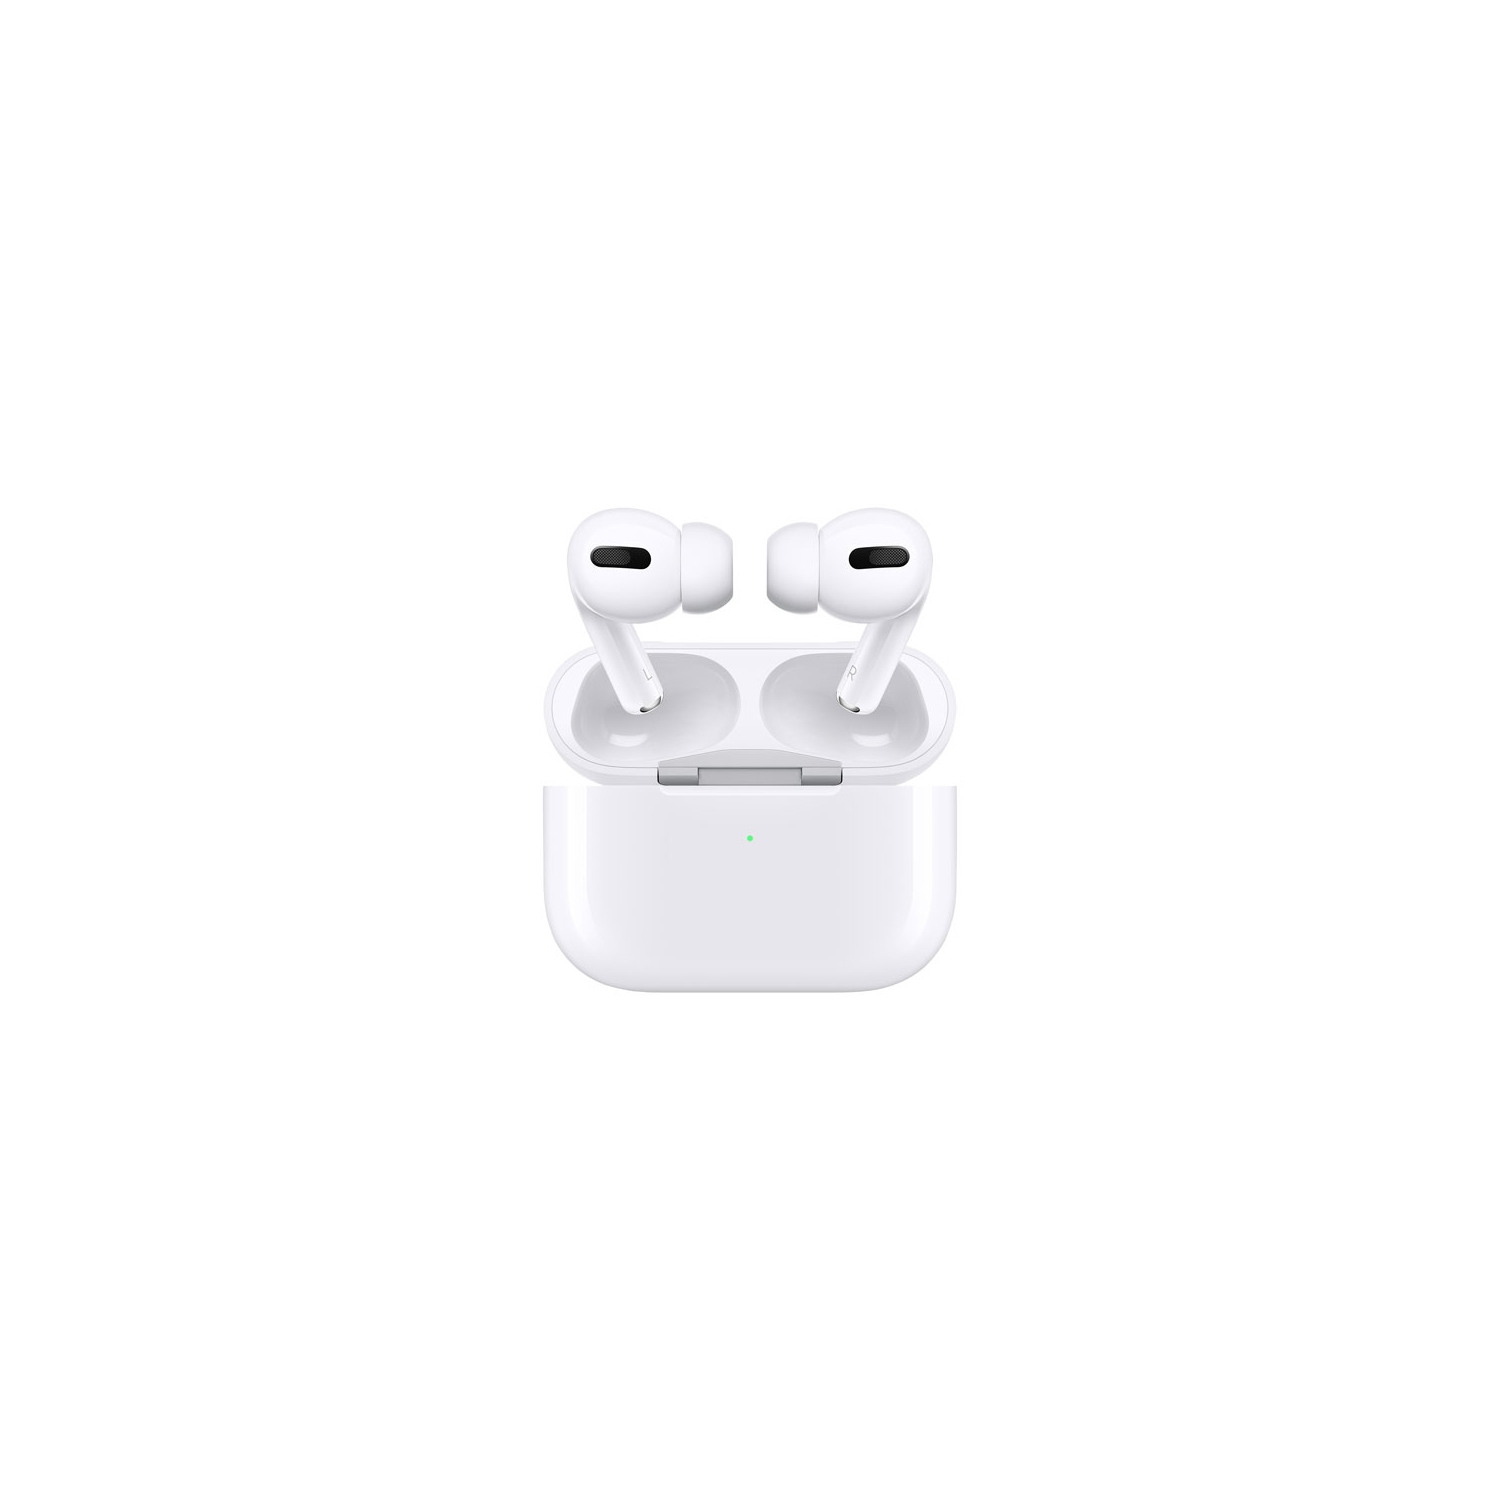 Refurbished (Good) - Apple AirPods Pro In-Ear Noise Cancelling Truly Wireless Headphones with MagSafe Charging Case - White